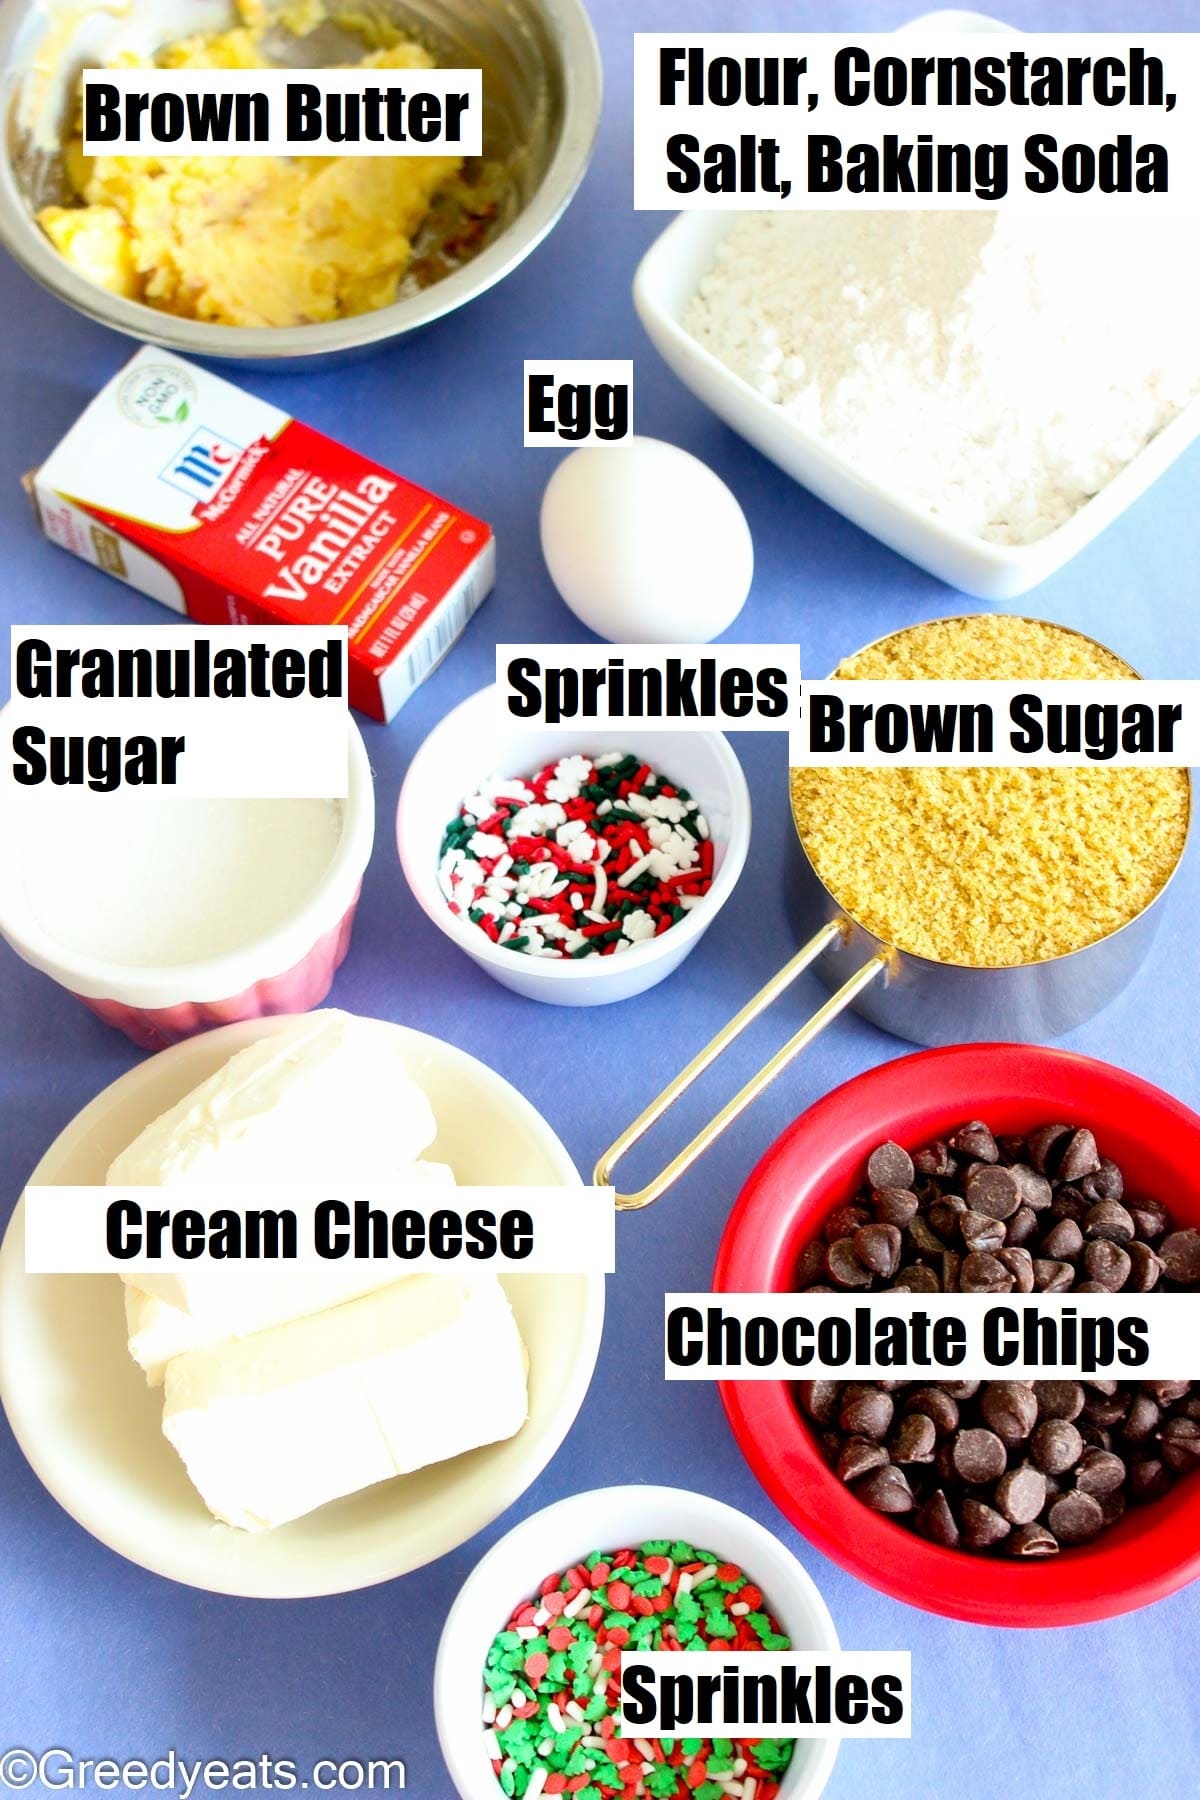 Ingredients spread like sugars, flour, baking soda, egg, chocolate chips, cornstarch and cream cheese for choc chip cookies.